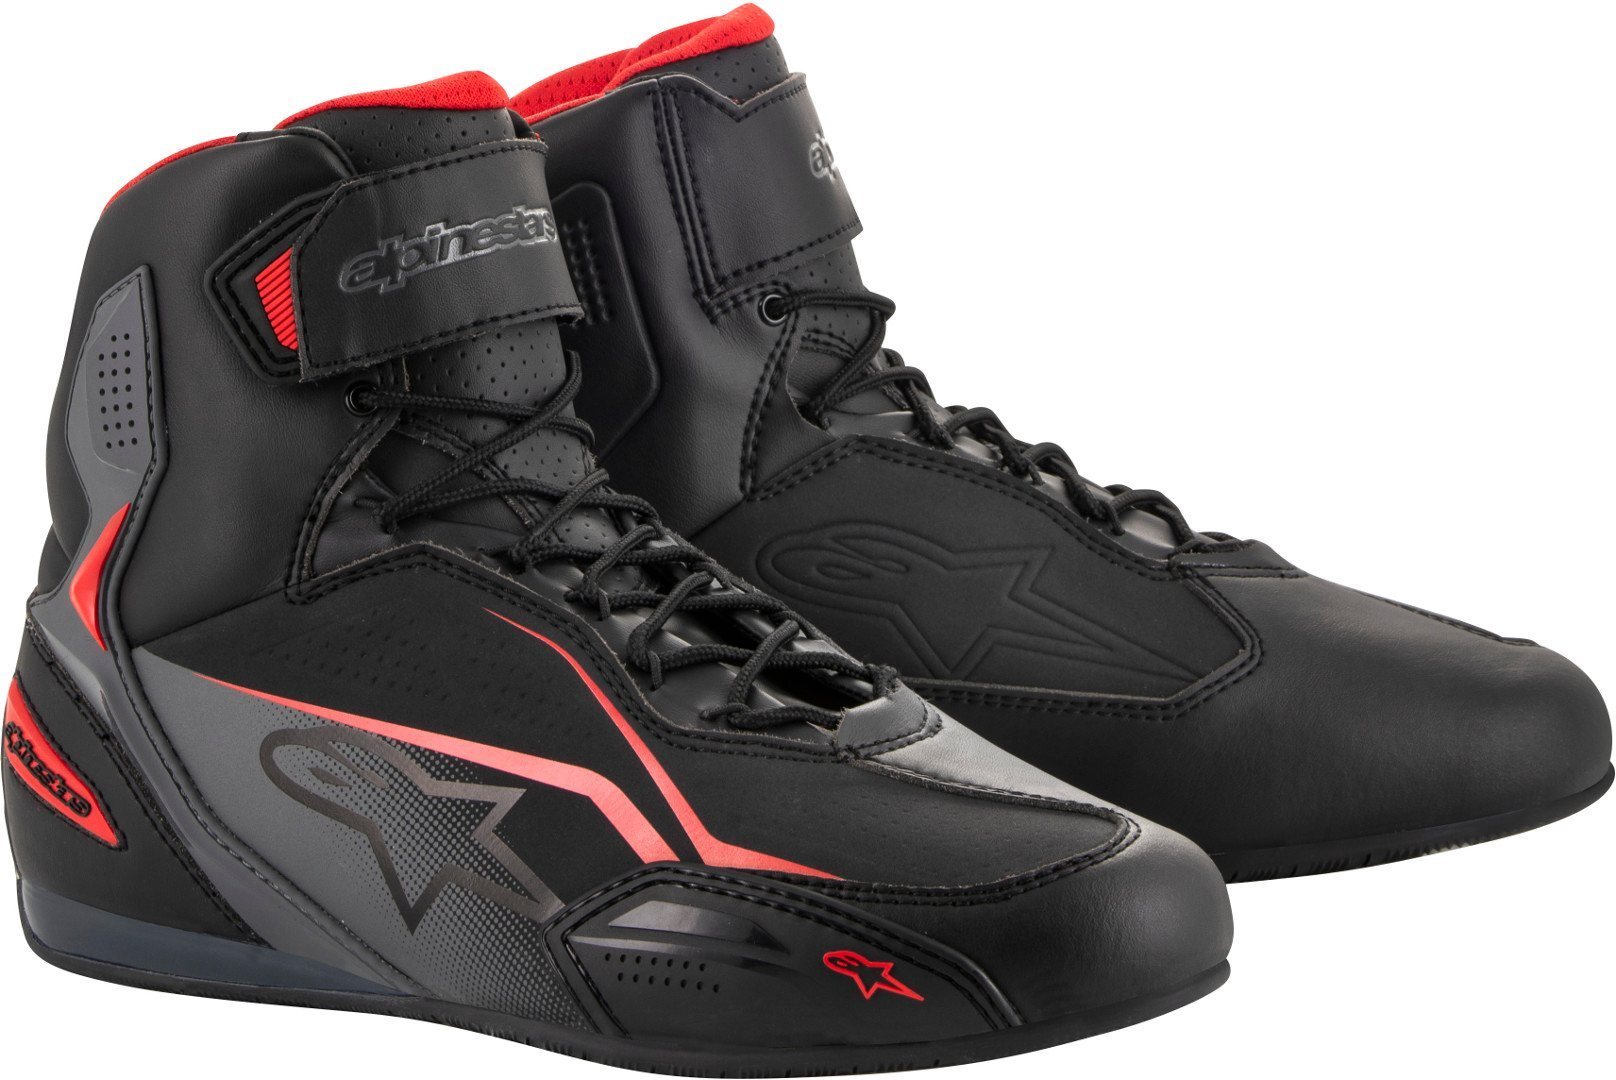 Alpinestars Faster-3 Motorcycle Shoes, black-grey-red, Size 47, black-grey-red, Size 47